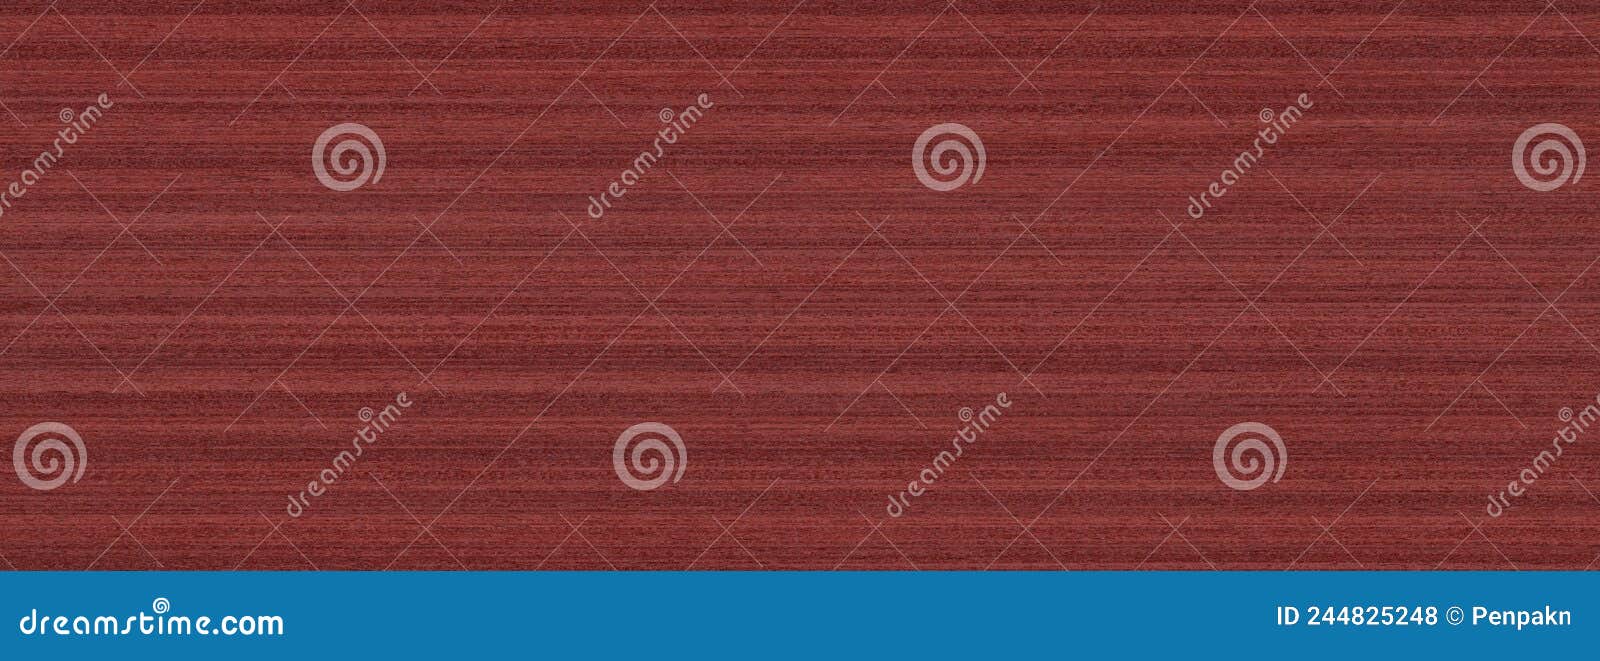 acero mapletop view wooden wall material burr surface texture background pattern dark red brown color build construction architect